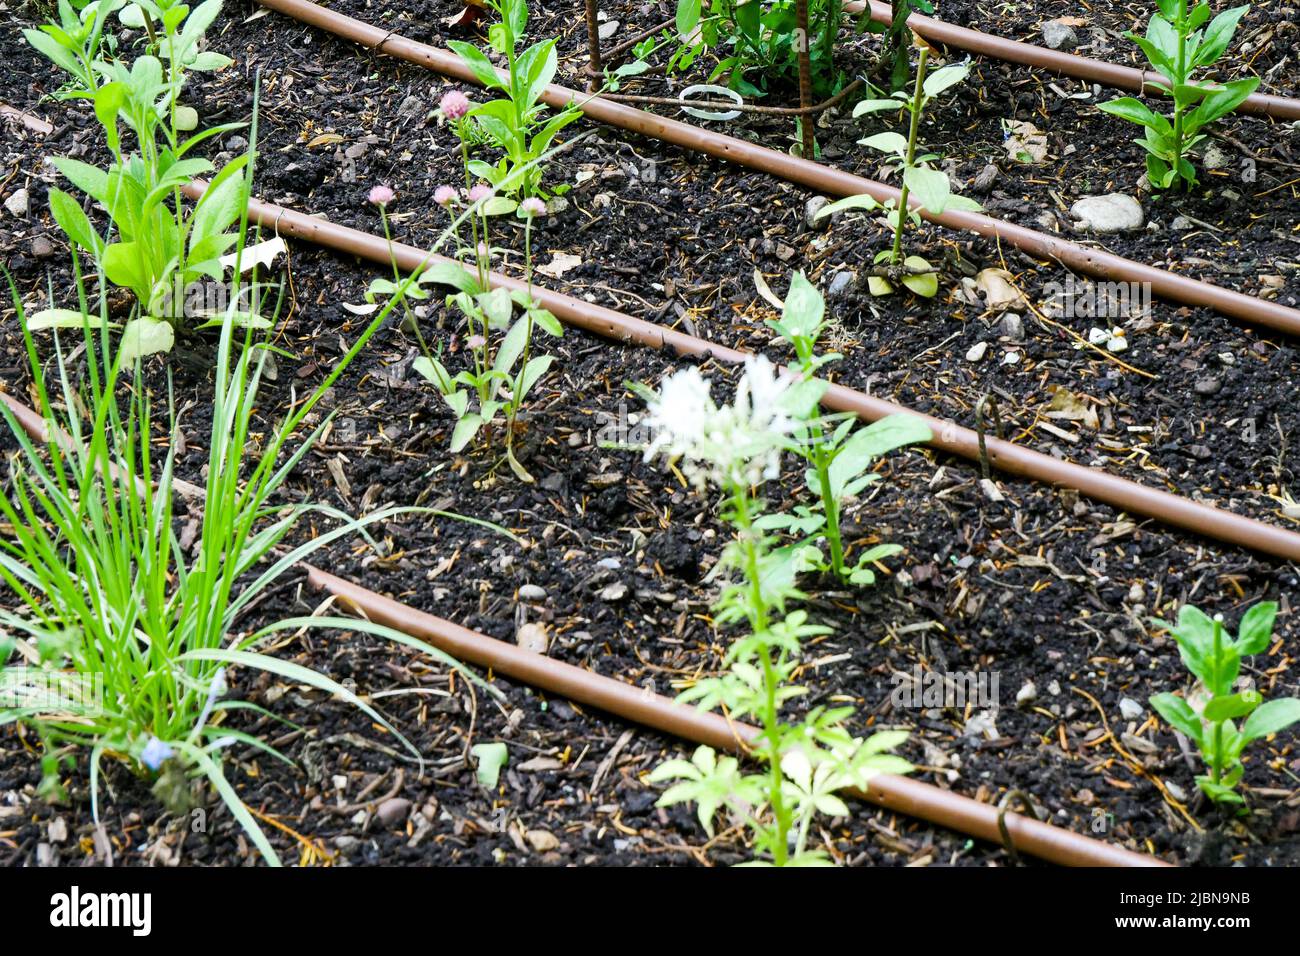 Watering system settled in a plants bed, Cerisaie Park, Lyon, Rhône department, AURA Region, France Stock Photo